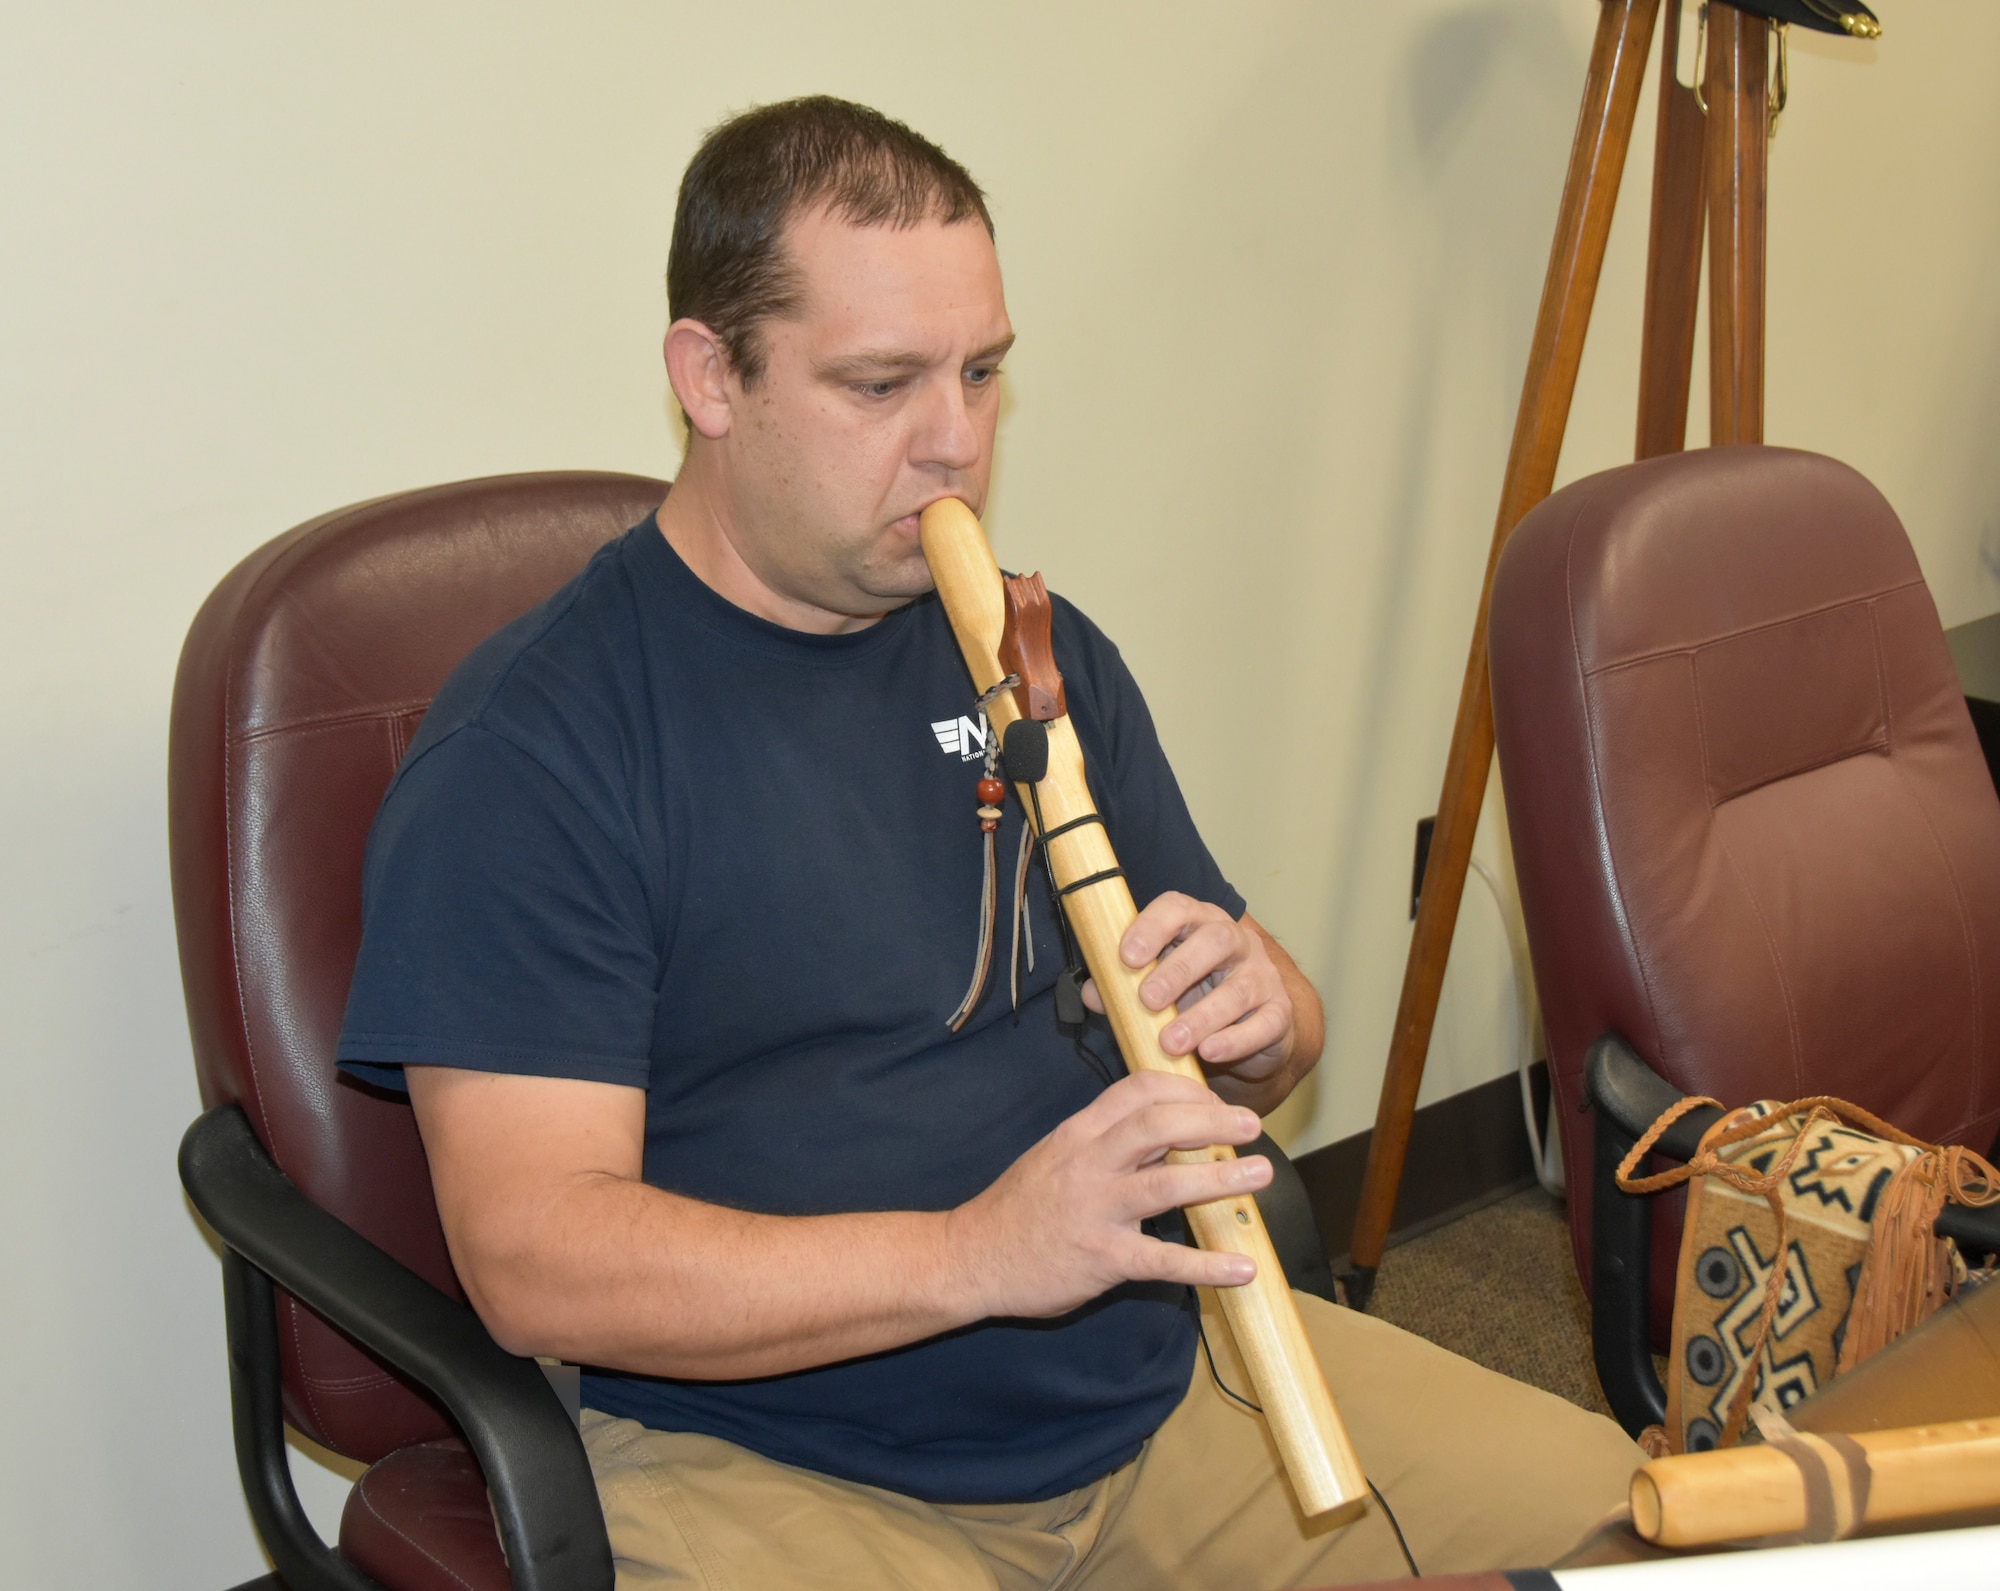 Kevin Ashley, an inside machinist with the Arnold Engineering Development Complex Model and Machine Shop at Arnold Air Force Base, Tenn., plays one of the Native American flutes he made. Ashley began playing the Native American flute around 20 years ago after purchasing his first and has been making his own flutes for more than a decade. (U.S. Air Force photo by Bradley Hicks) (This image has been altered by obscuring badges for security purposes.)